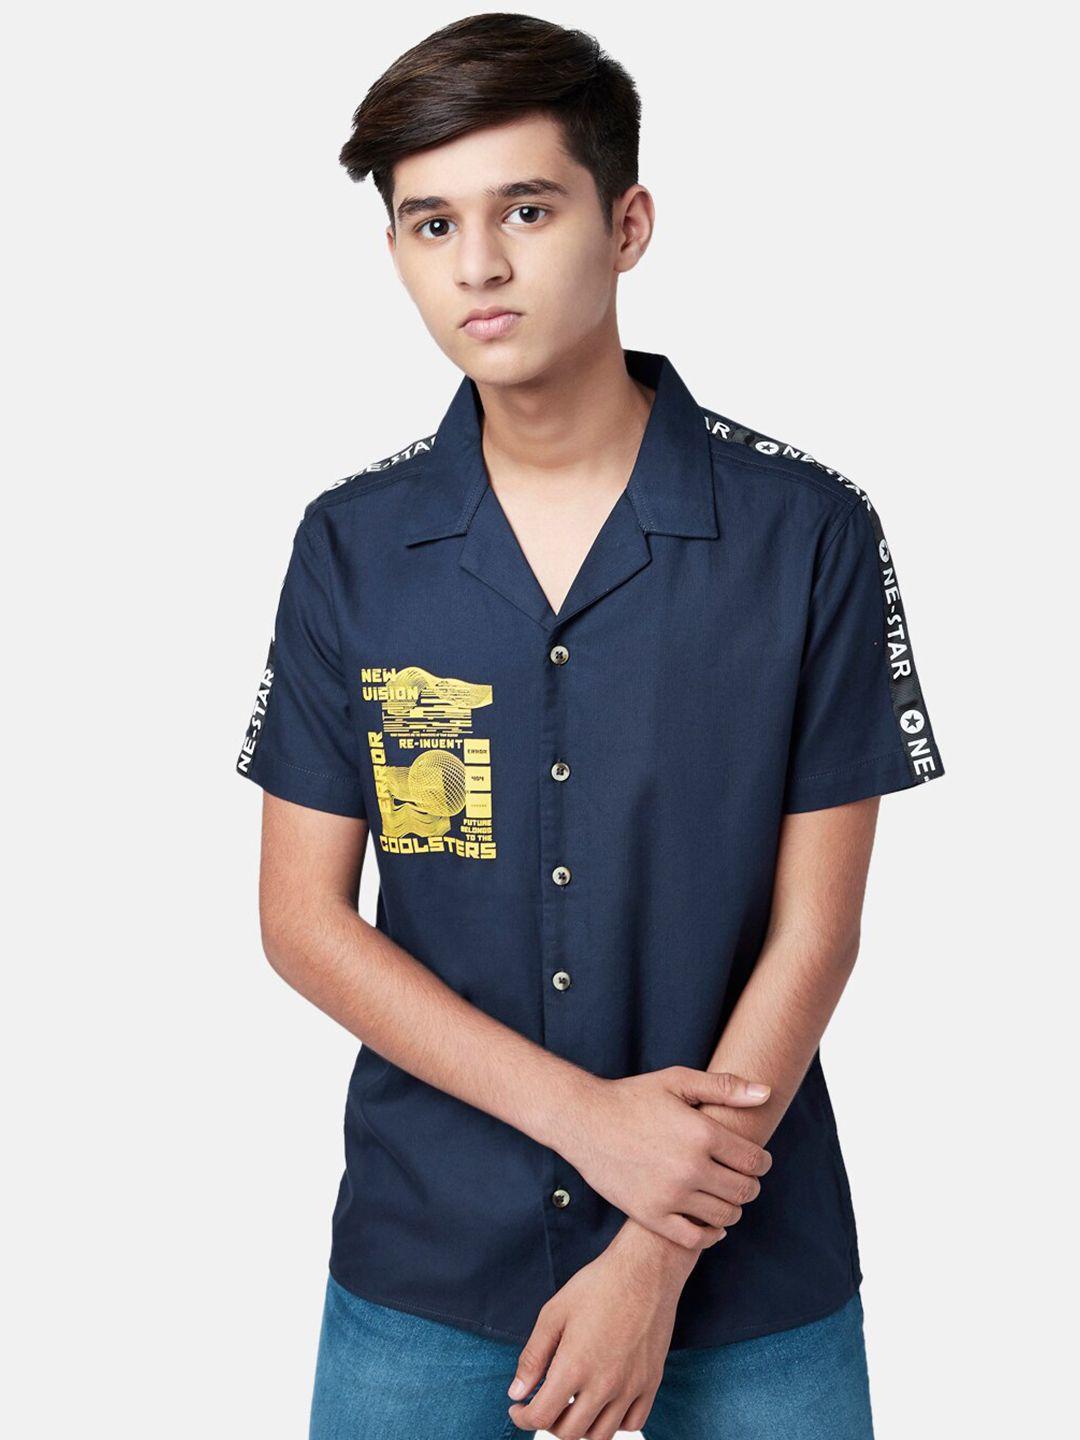 coolsters by pantaloons boys navy blue cotton casual shirt